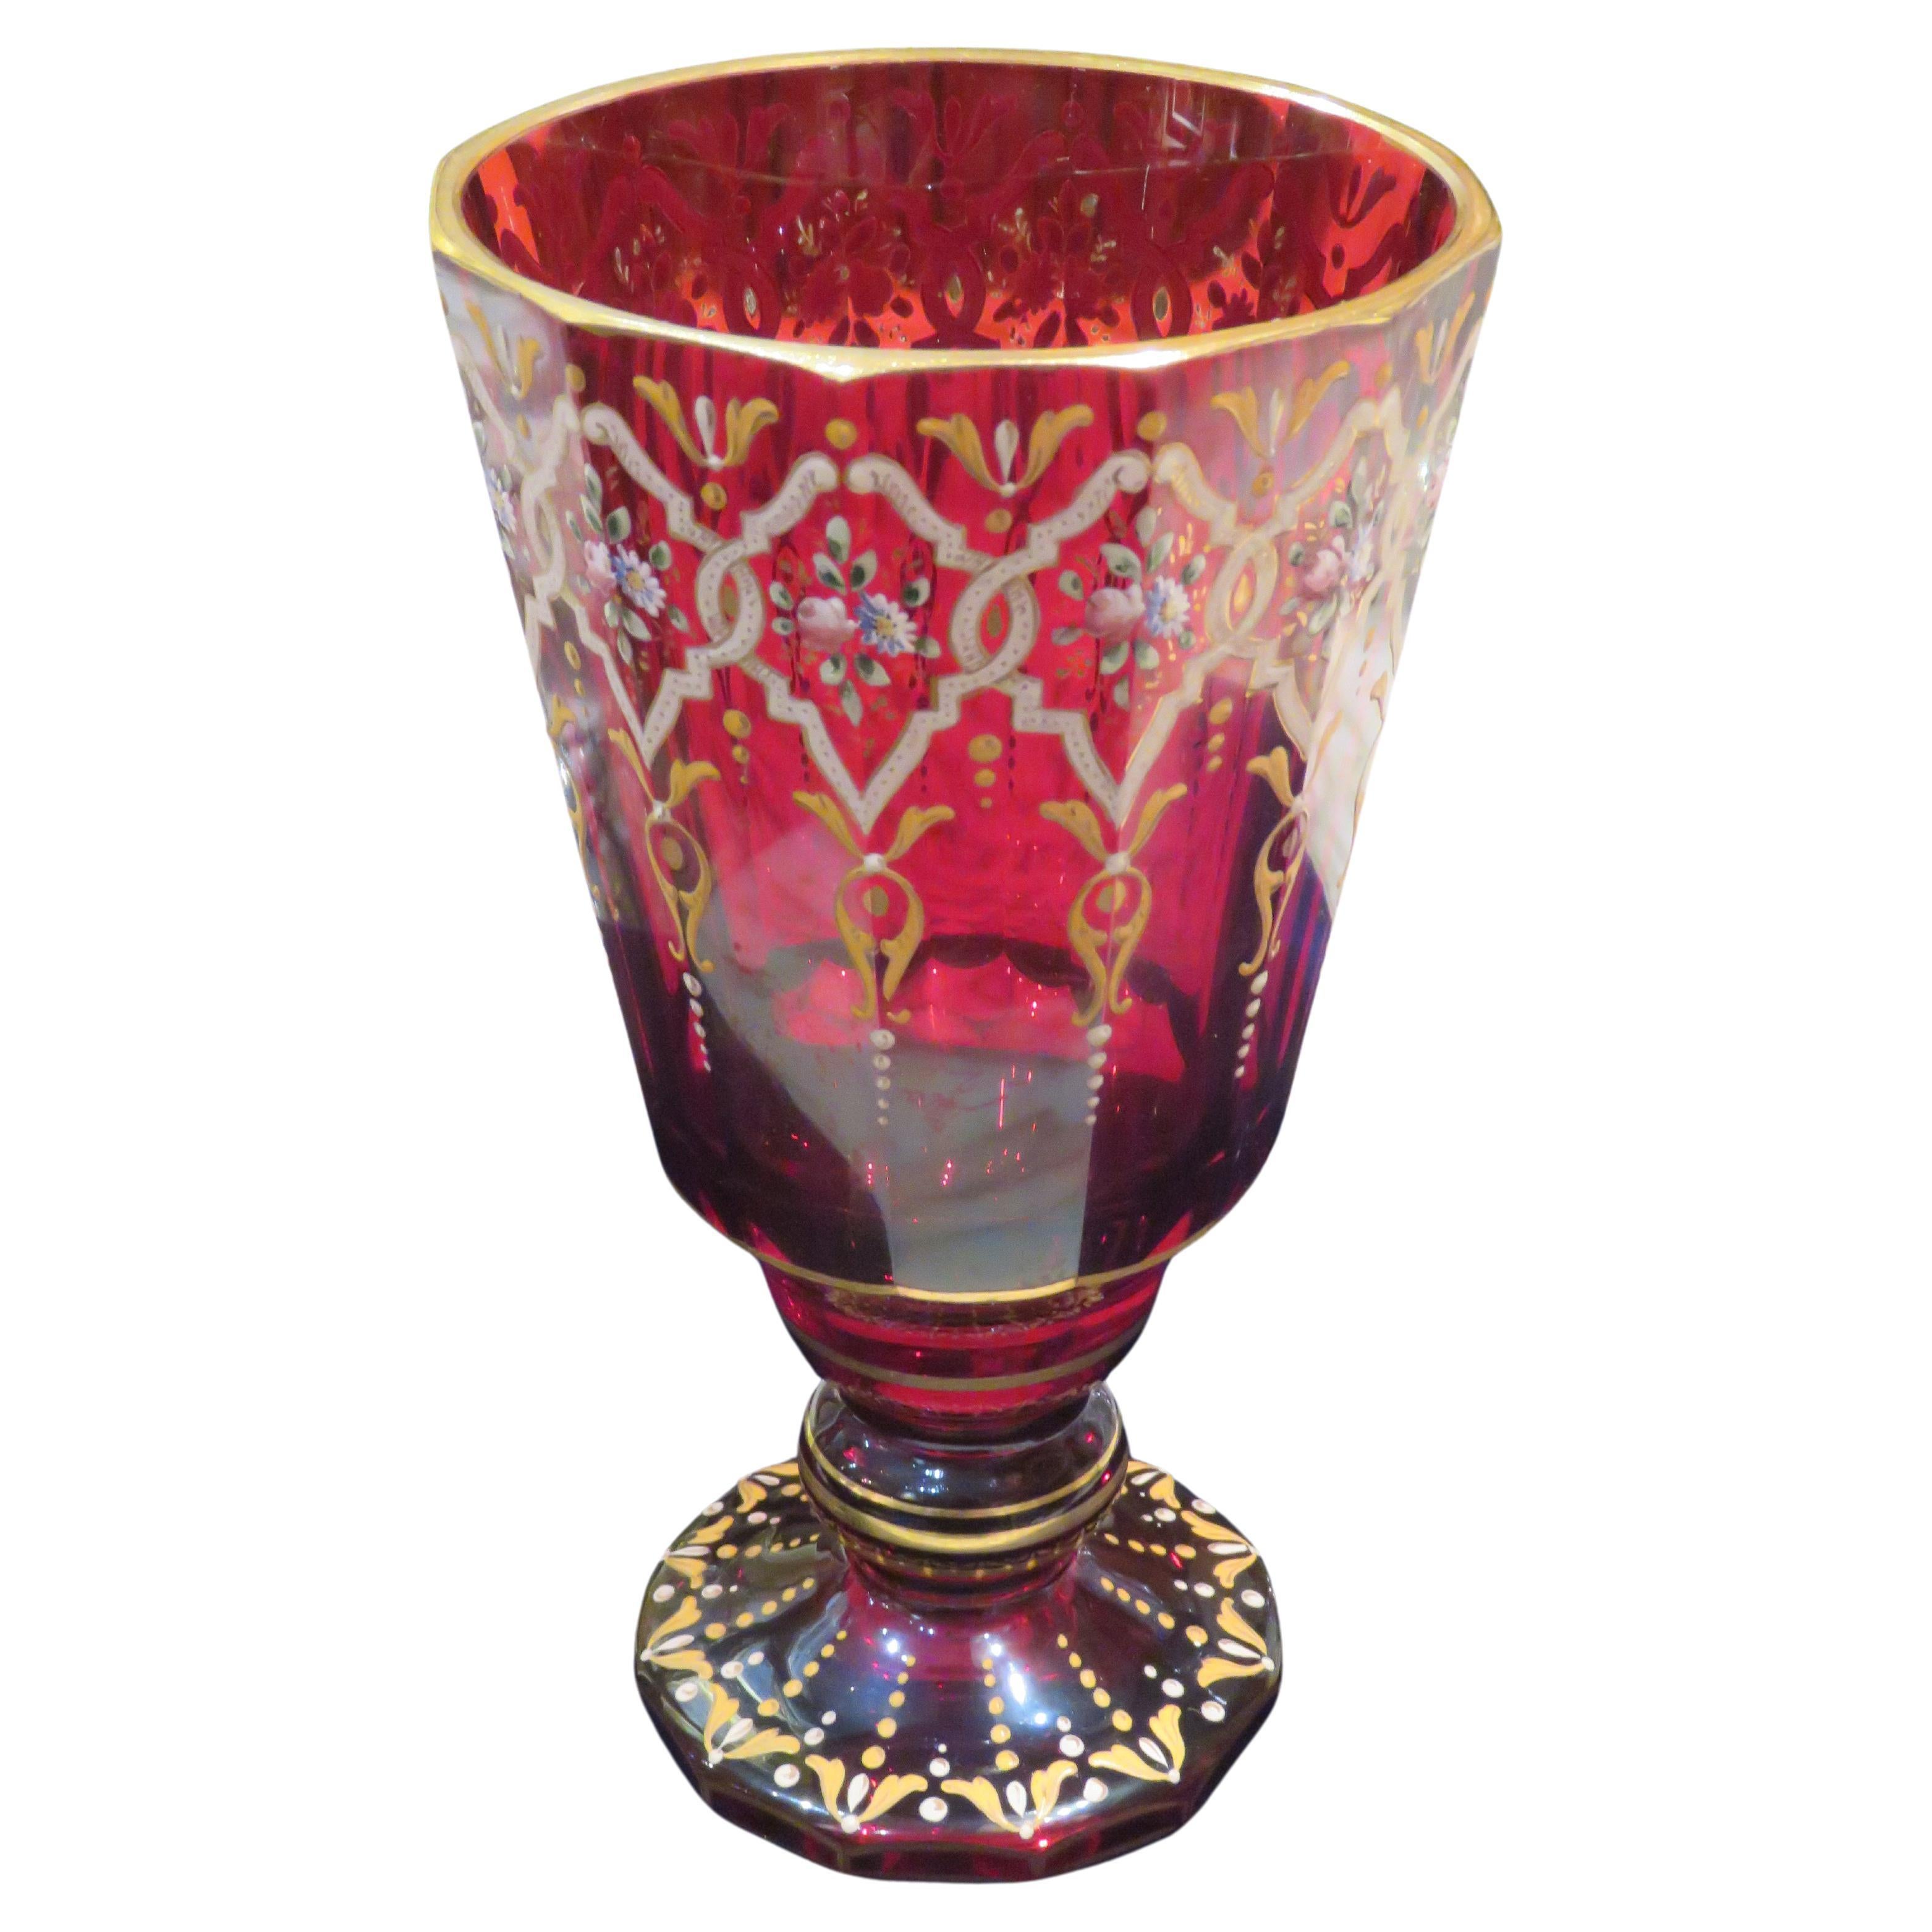 Extremely Rare Important 19th C Cranberry Gold White Floral Glass Goblet For Sale